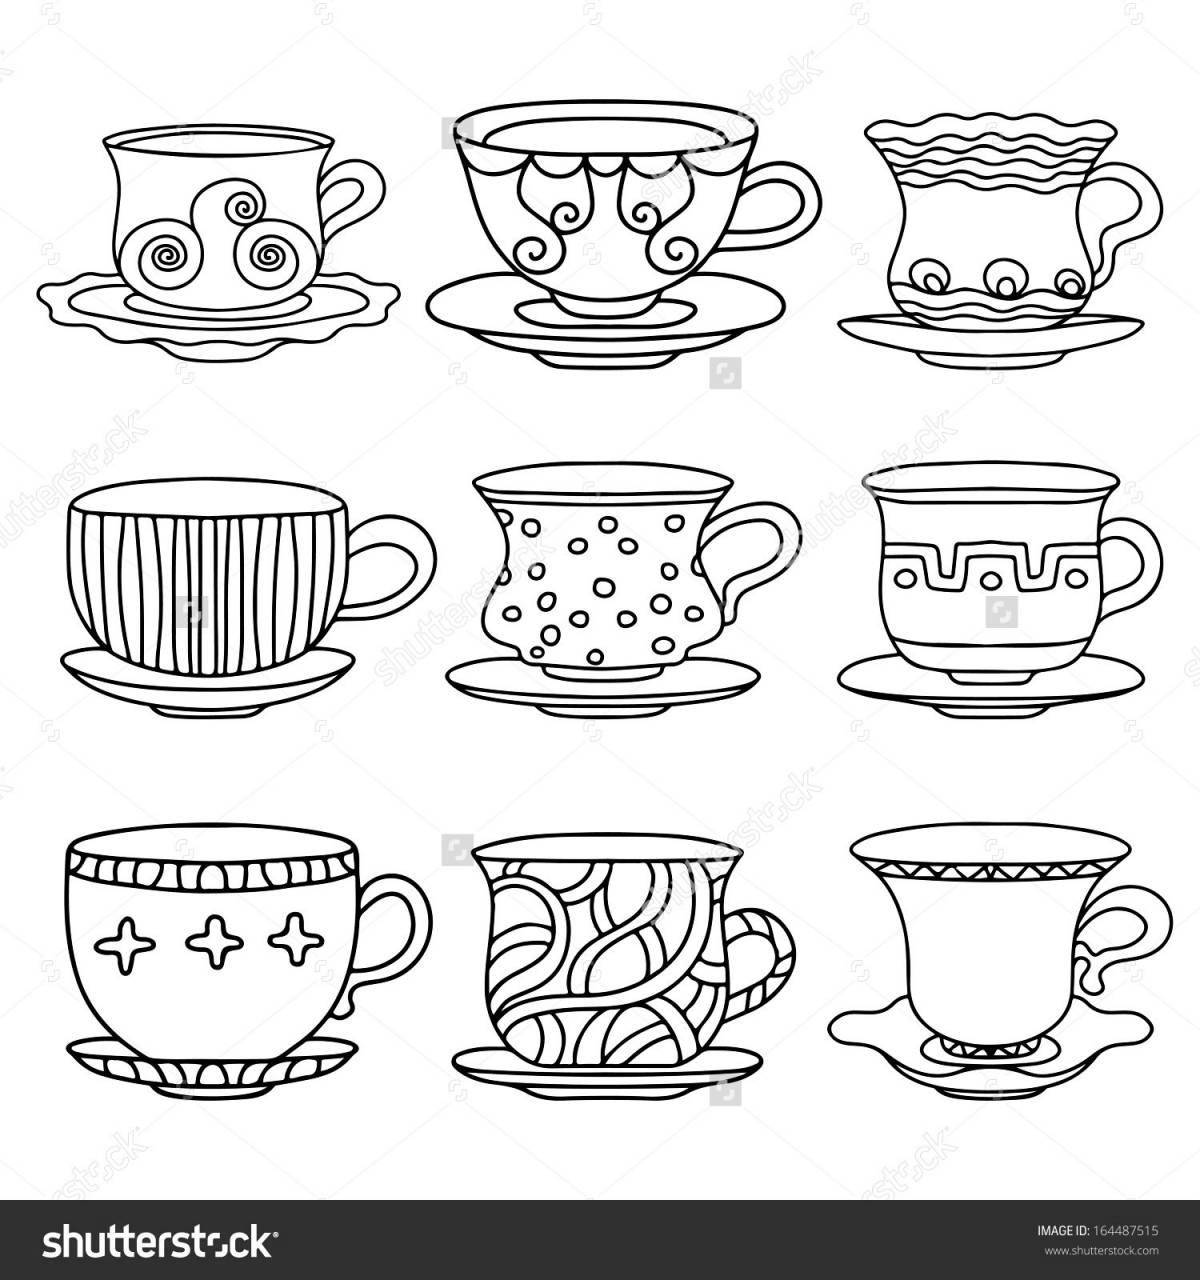 Serene tea couple coloring page